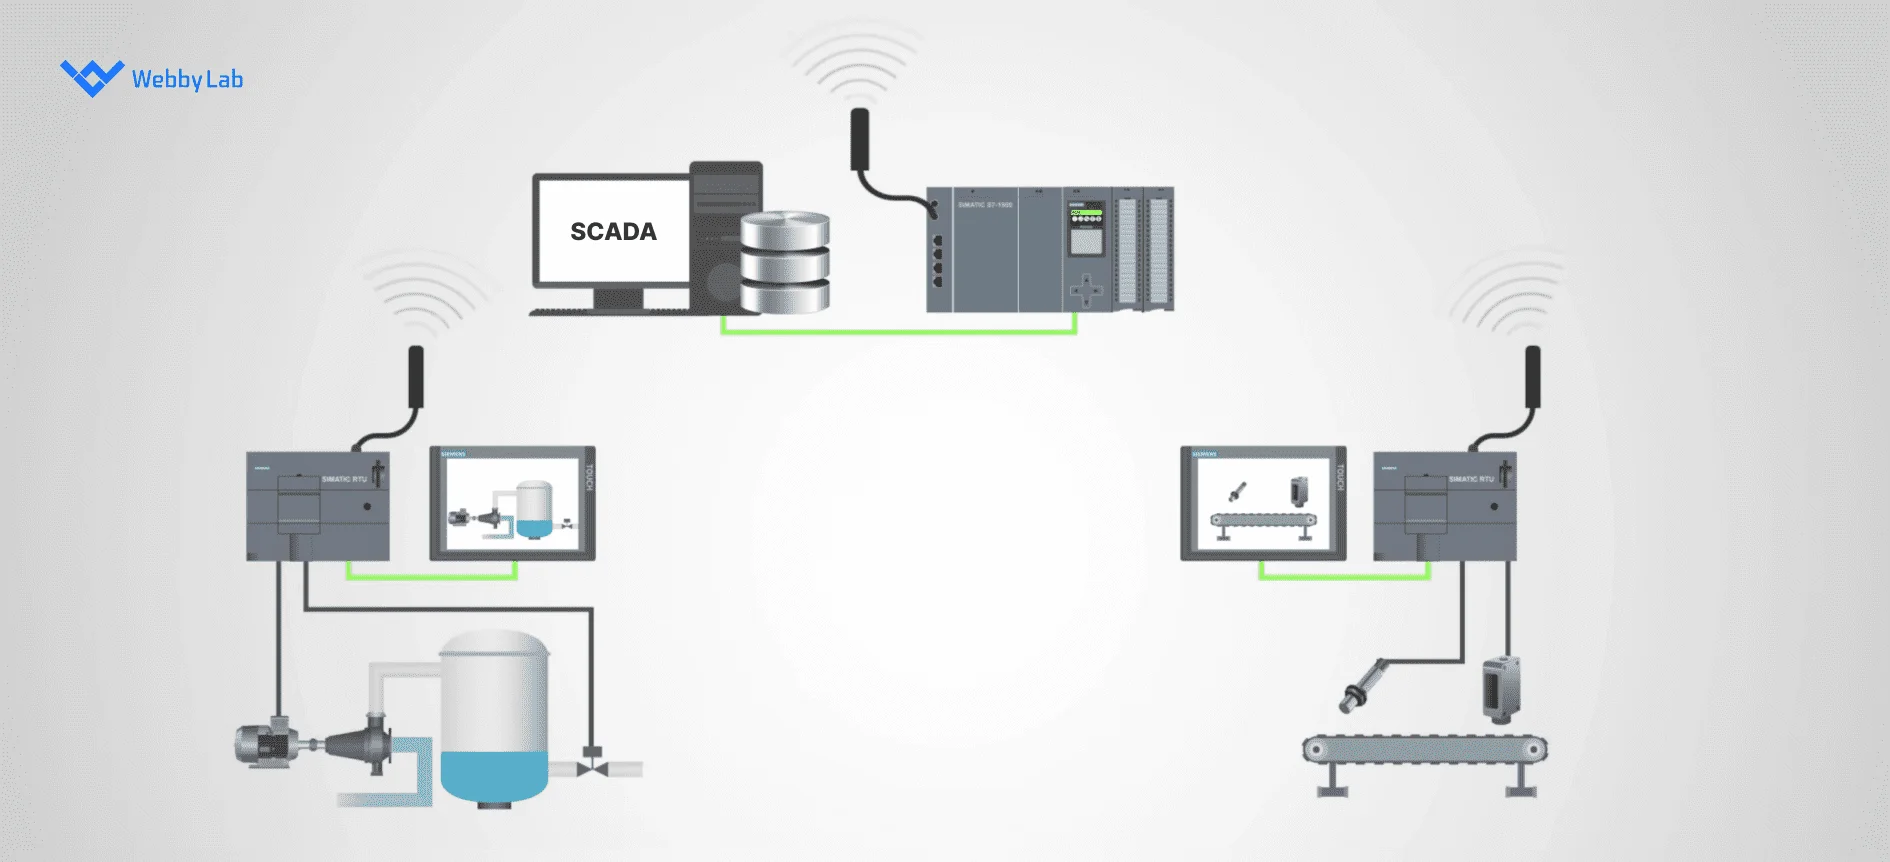 Using IoT in SCADA to connect each equipment piece wirelessly to the central RTU/PLC and the server.